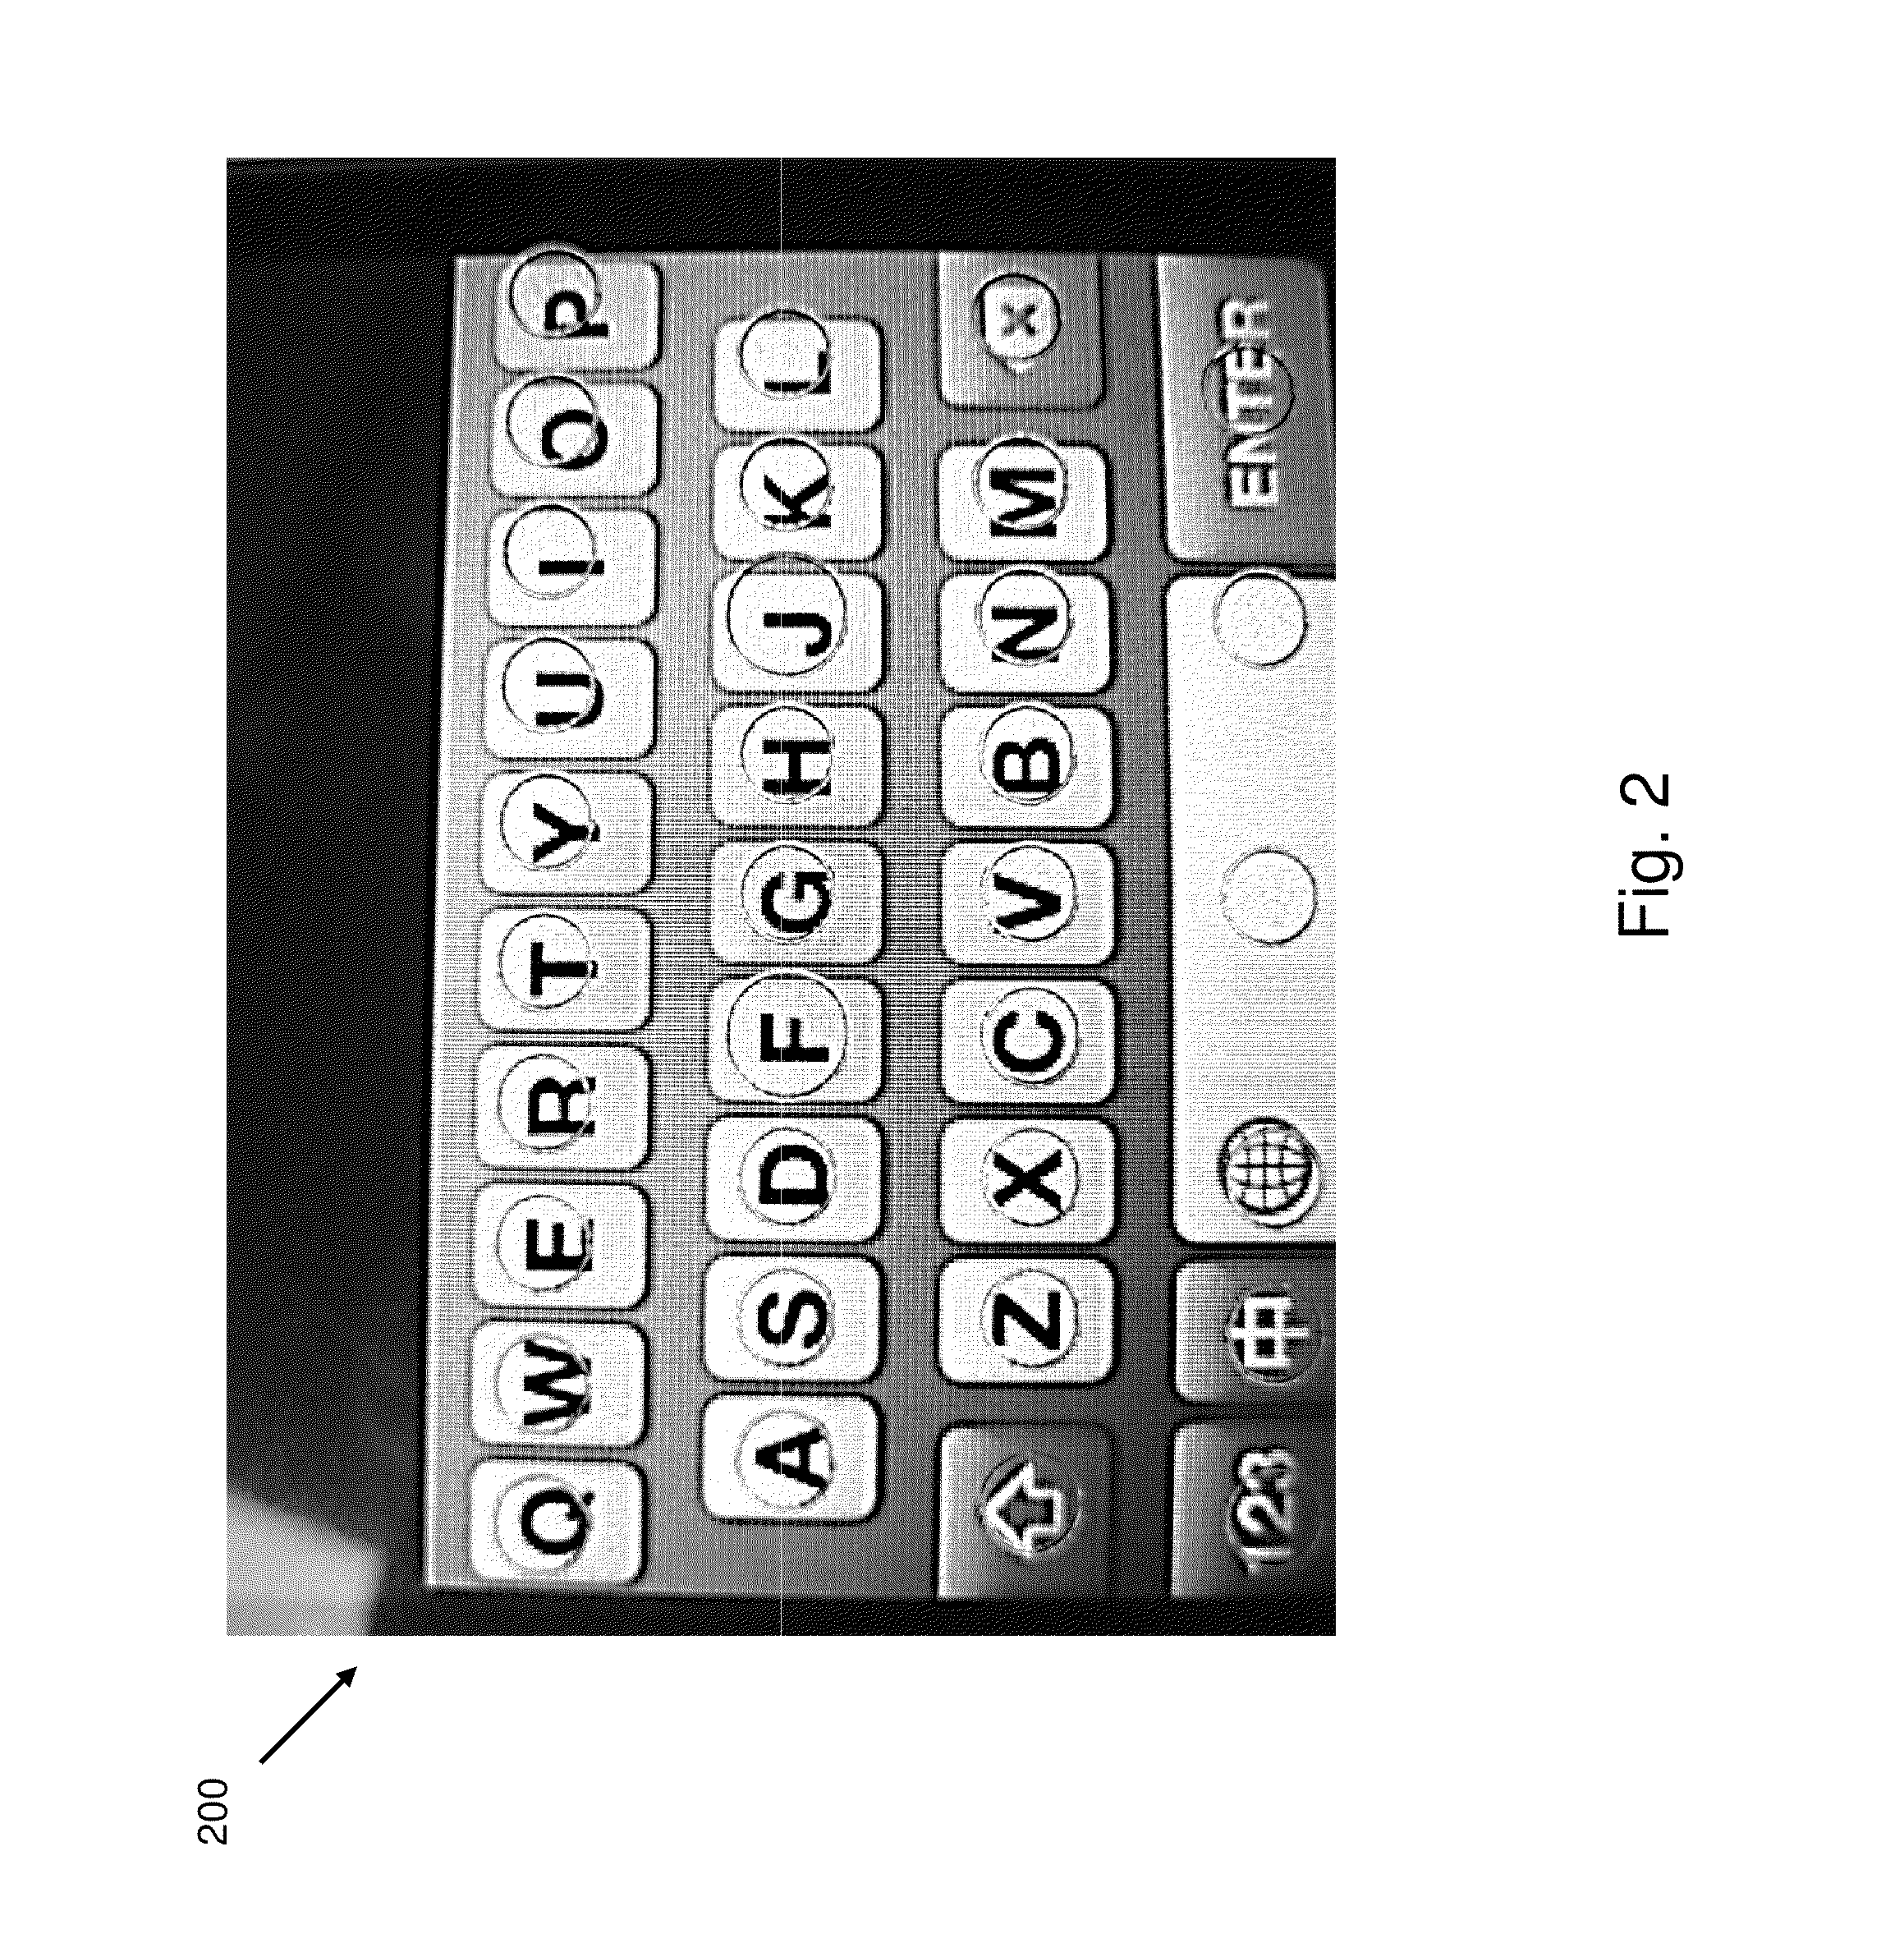 Touch screen overlay for mobile devices to facilitate accuracy and speed of data entry